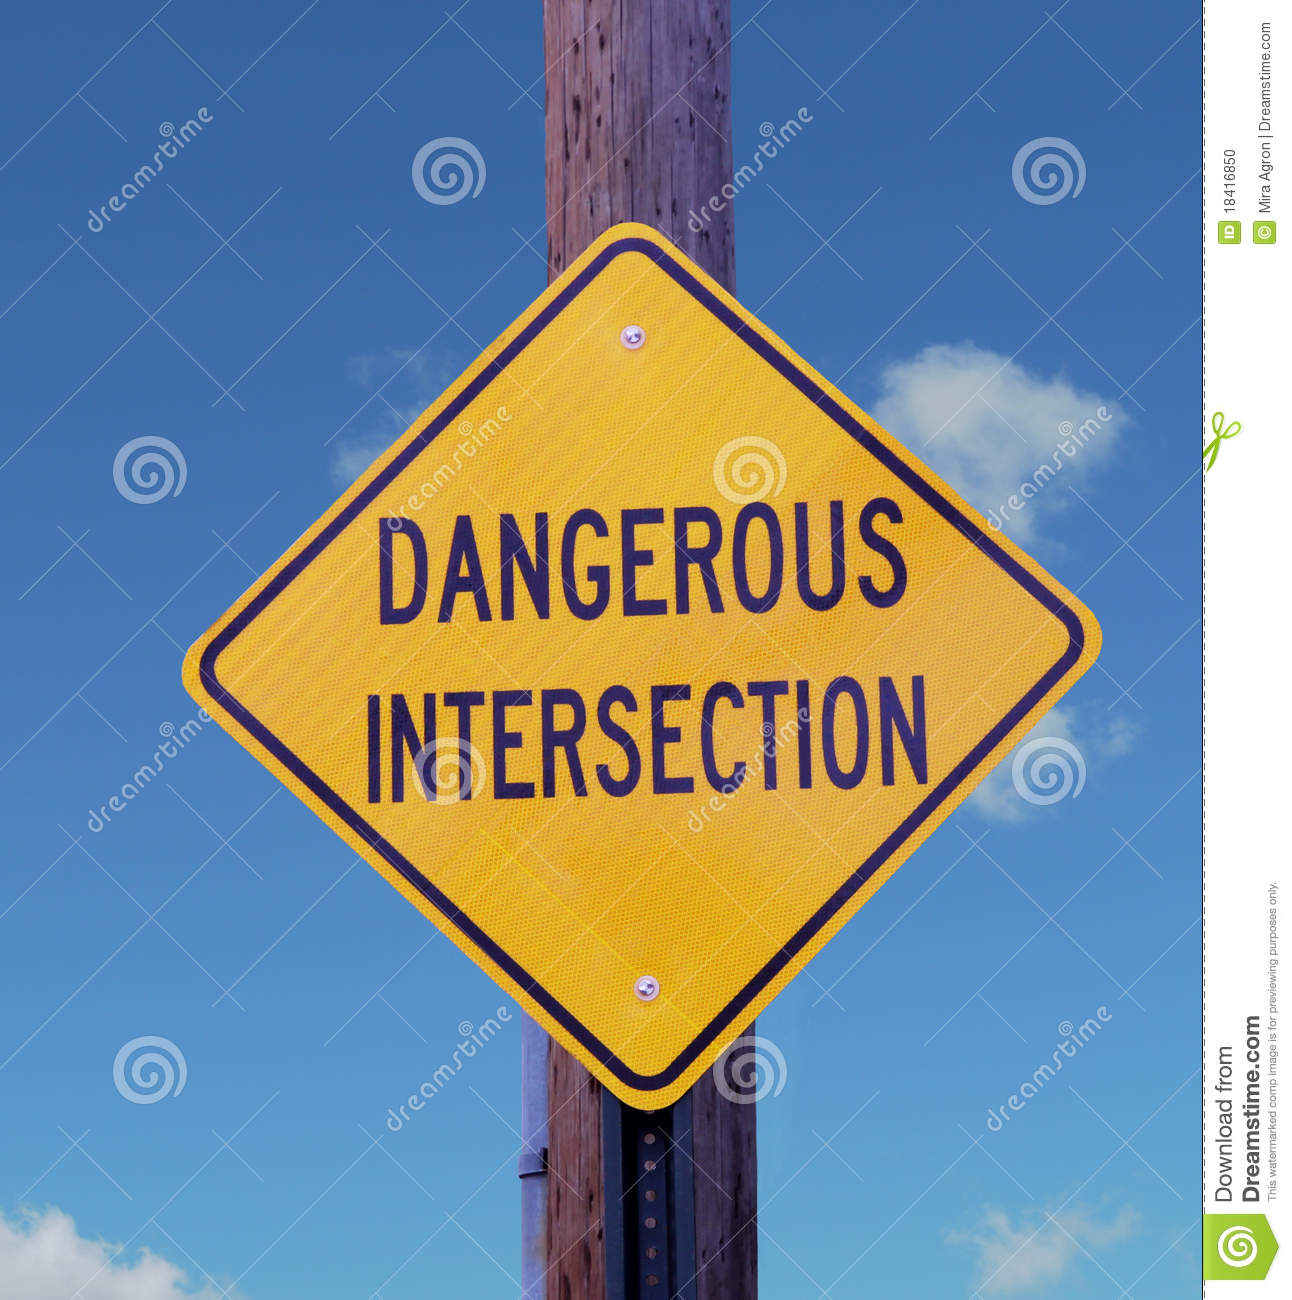 More Similar Stock Images Of   Dangerous Intersection Sign   